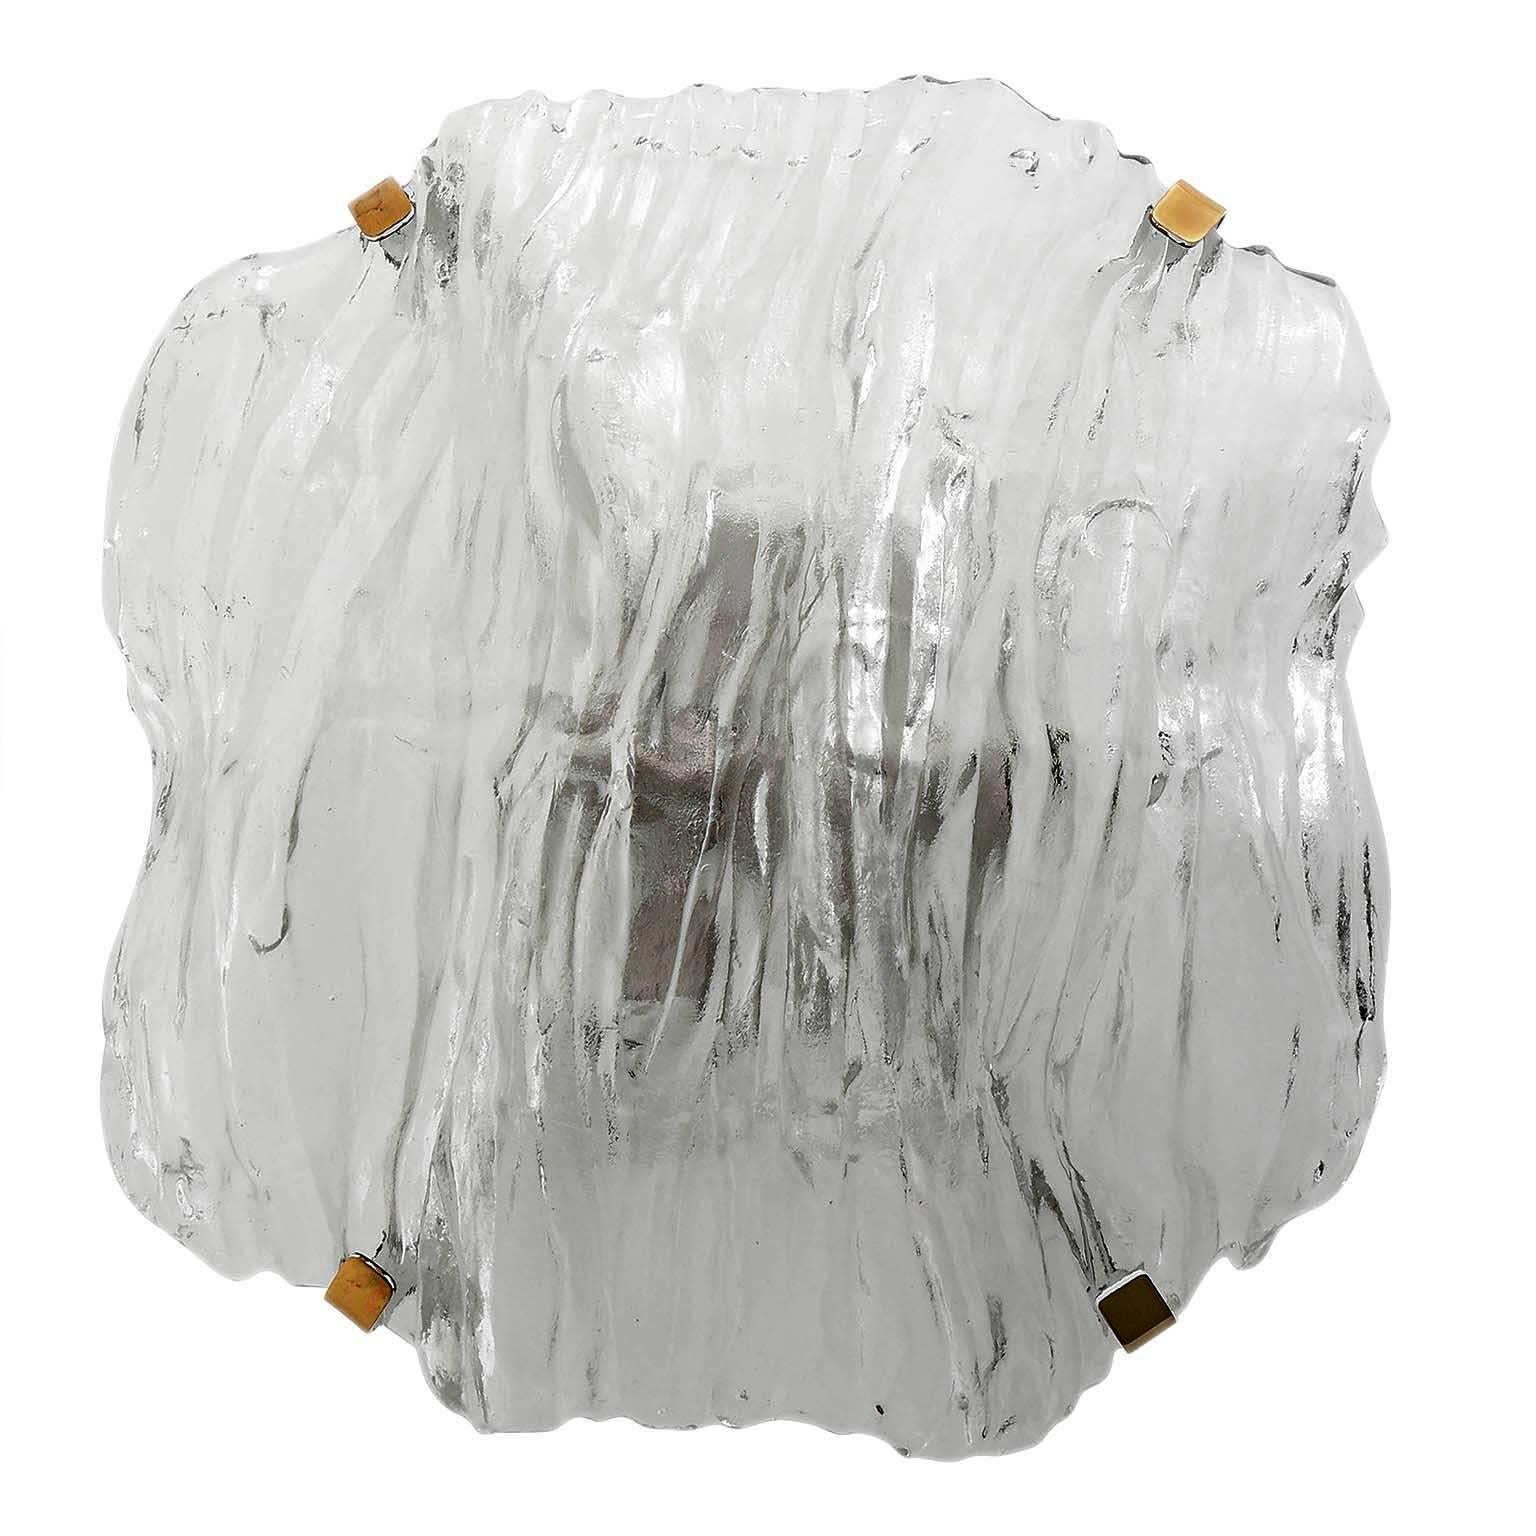 A large and rare flush mount light by Kalmar, Austria, manufactured in Mid-Century, circa 1970 (late 1960s or early 1970s).
An organic shaped clear Murano glass piece is held with four polished brass brackets on a white painted metal backplate.
The